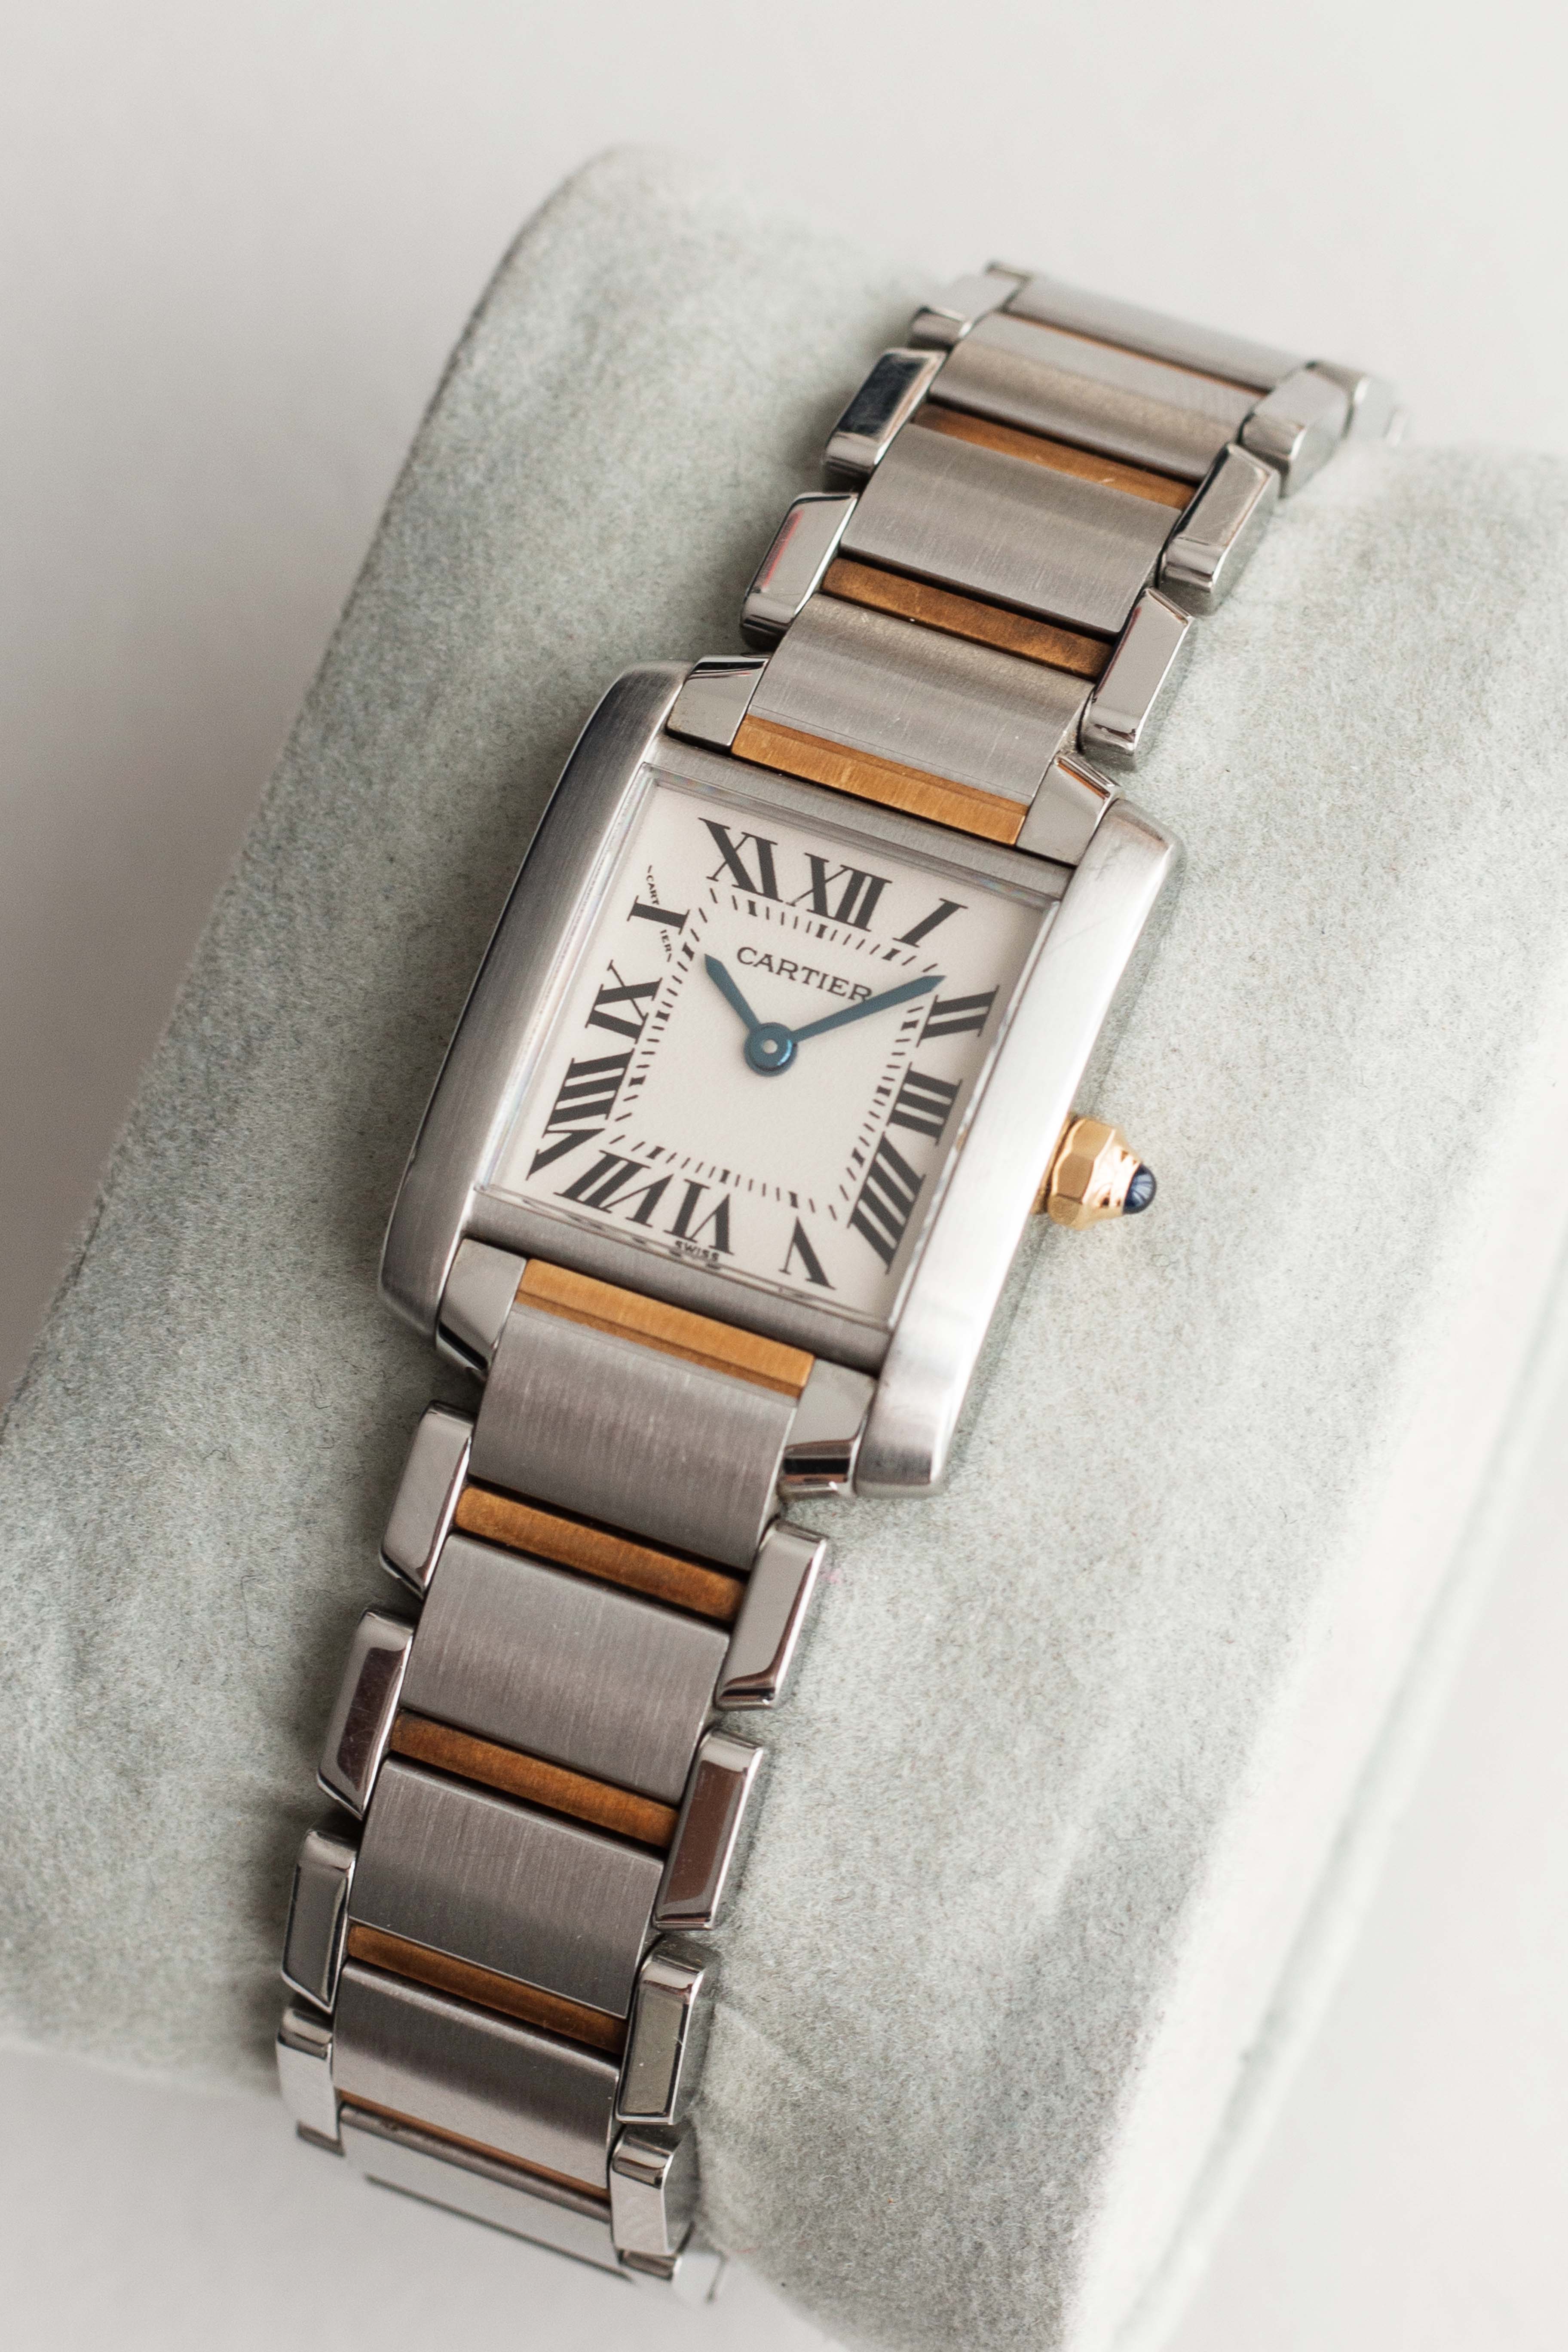 Cartier Tank Francaise 'Two Tone' Ref. 2384 2000's w/ Box